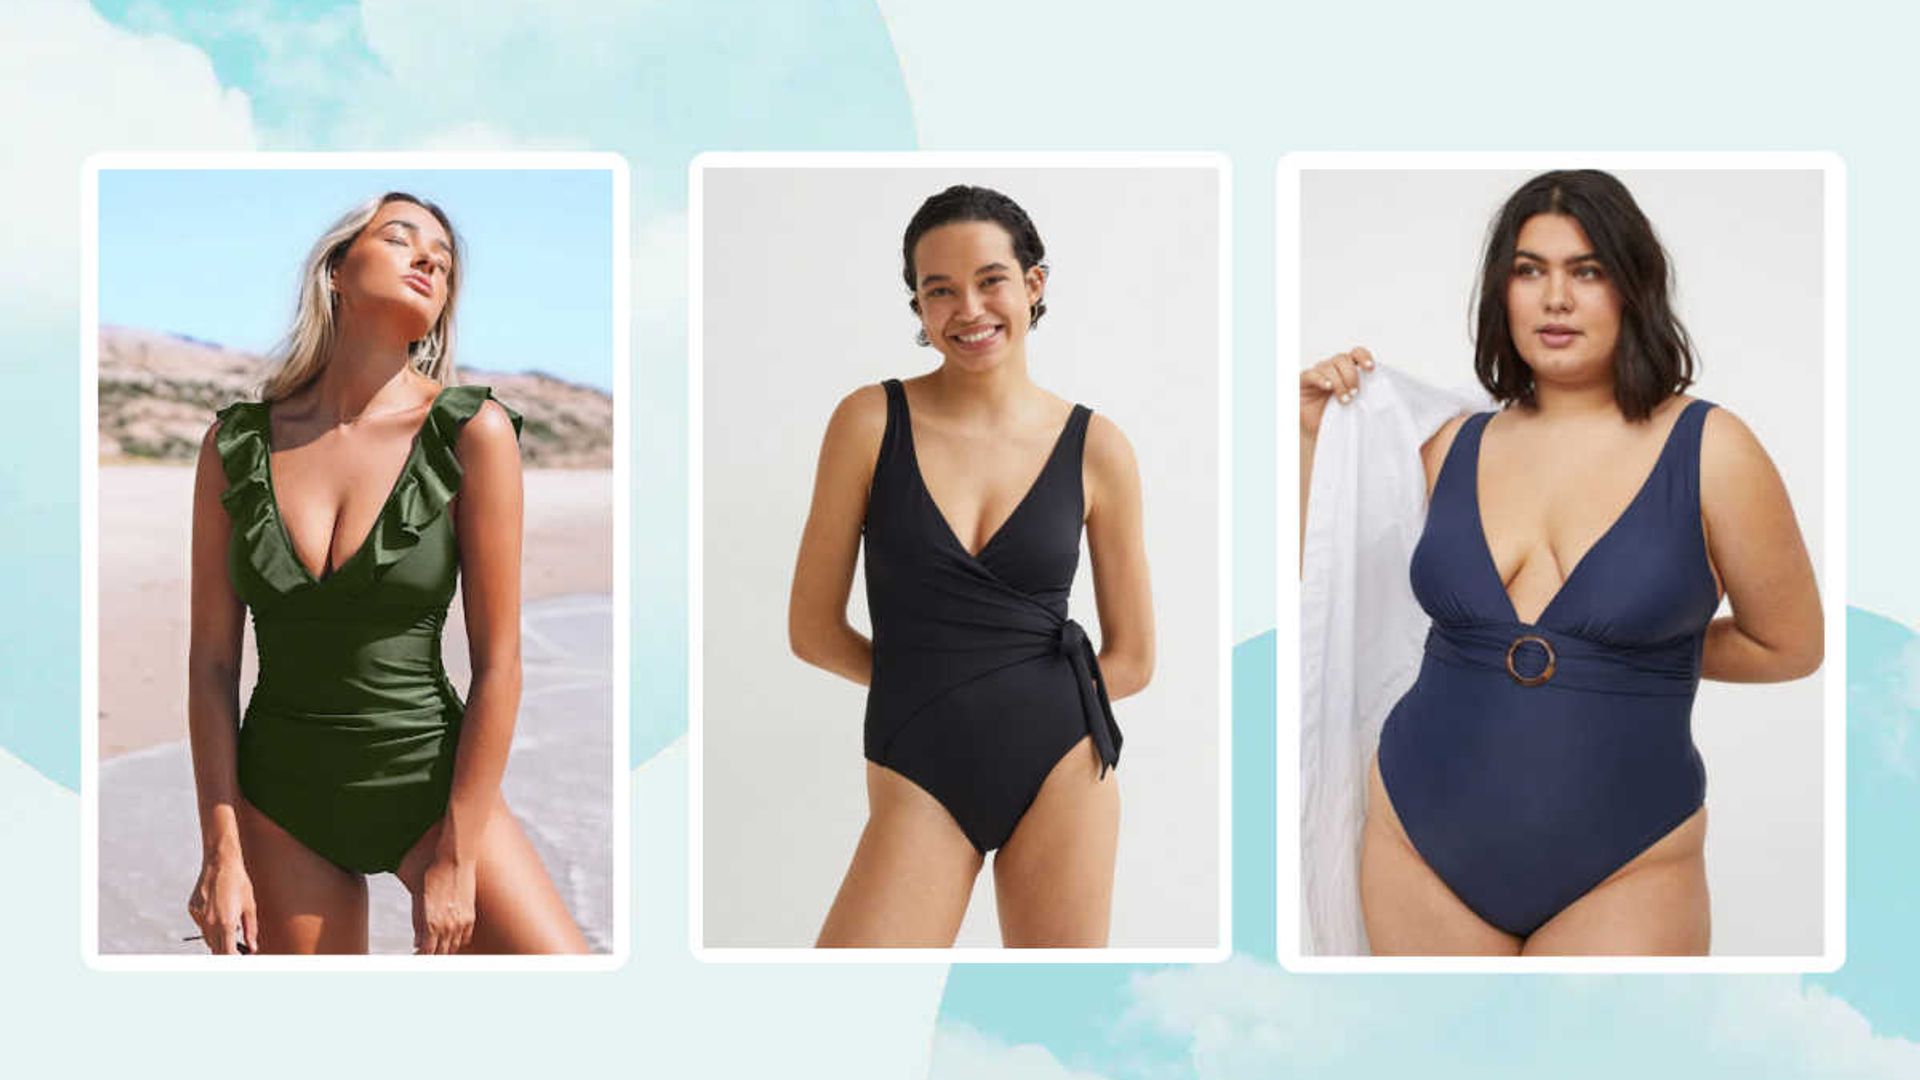 15 swimsuits with tummy control: Flattering body sculpting looks for beach or poolside